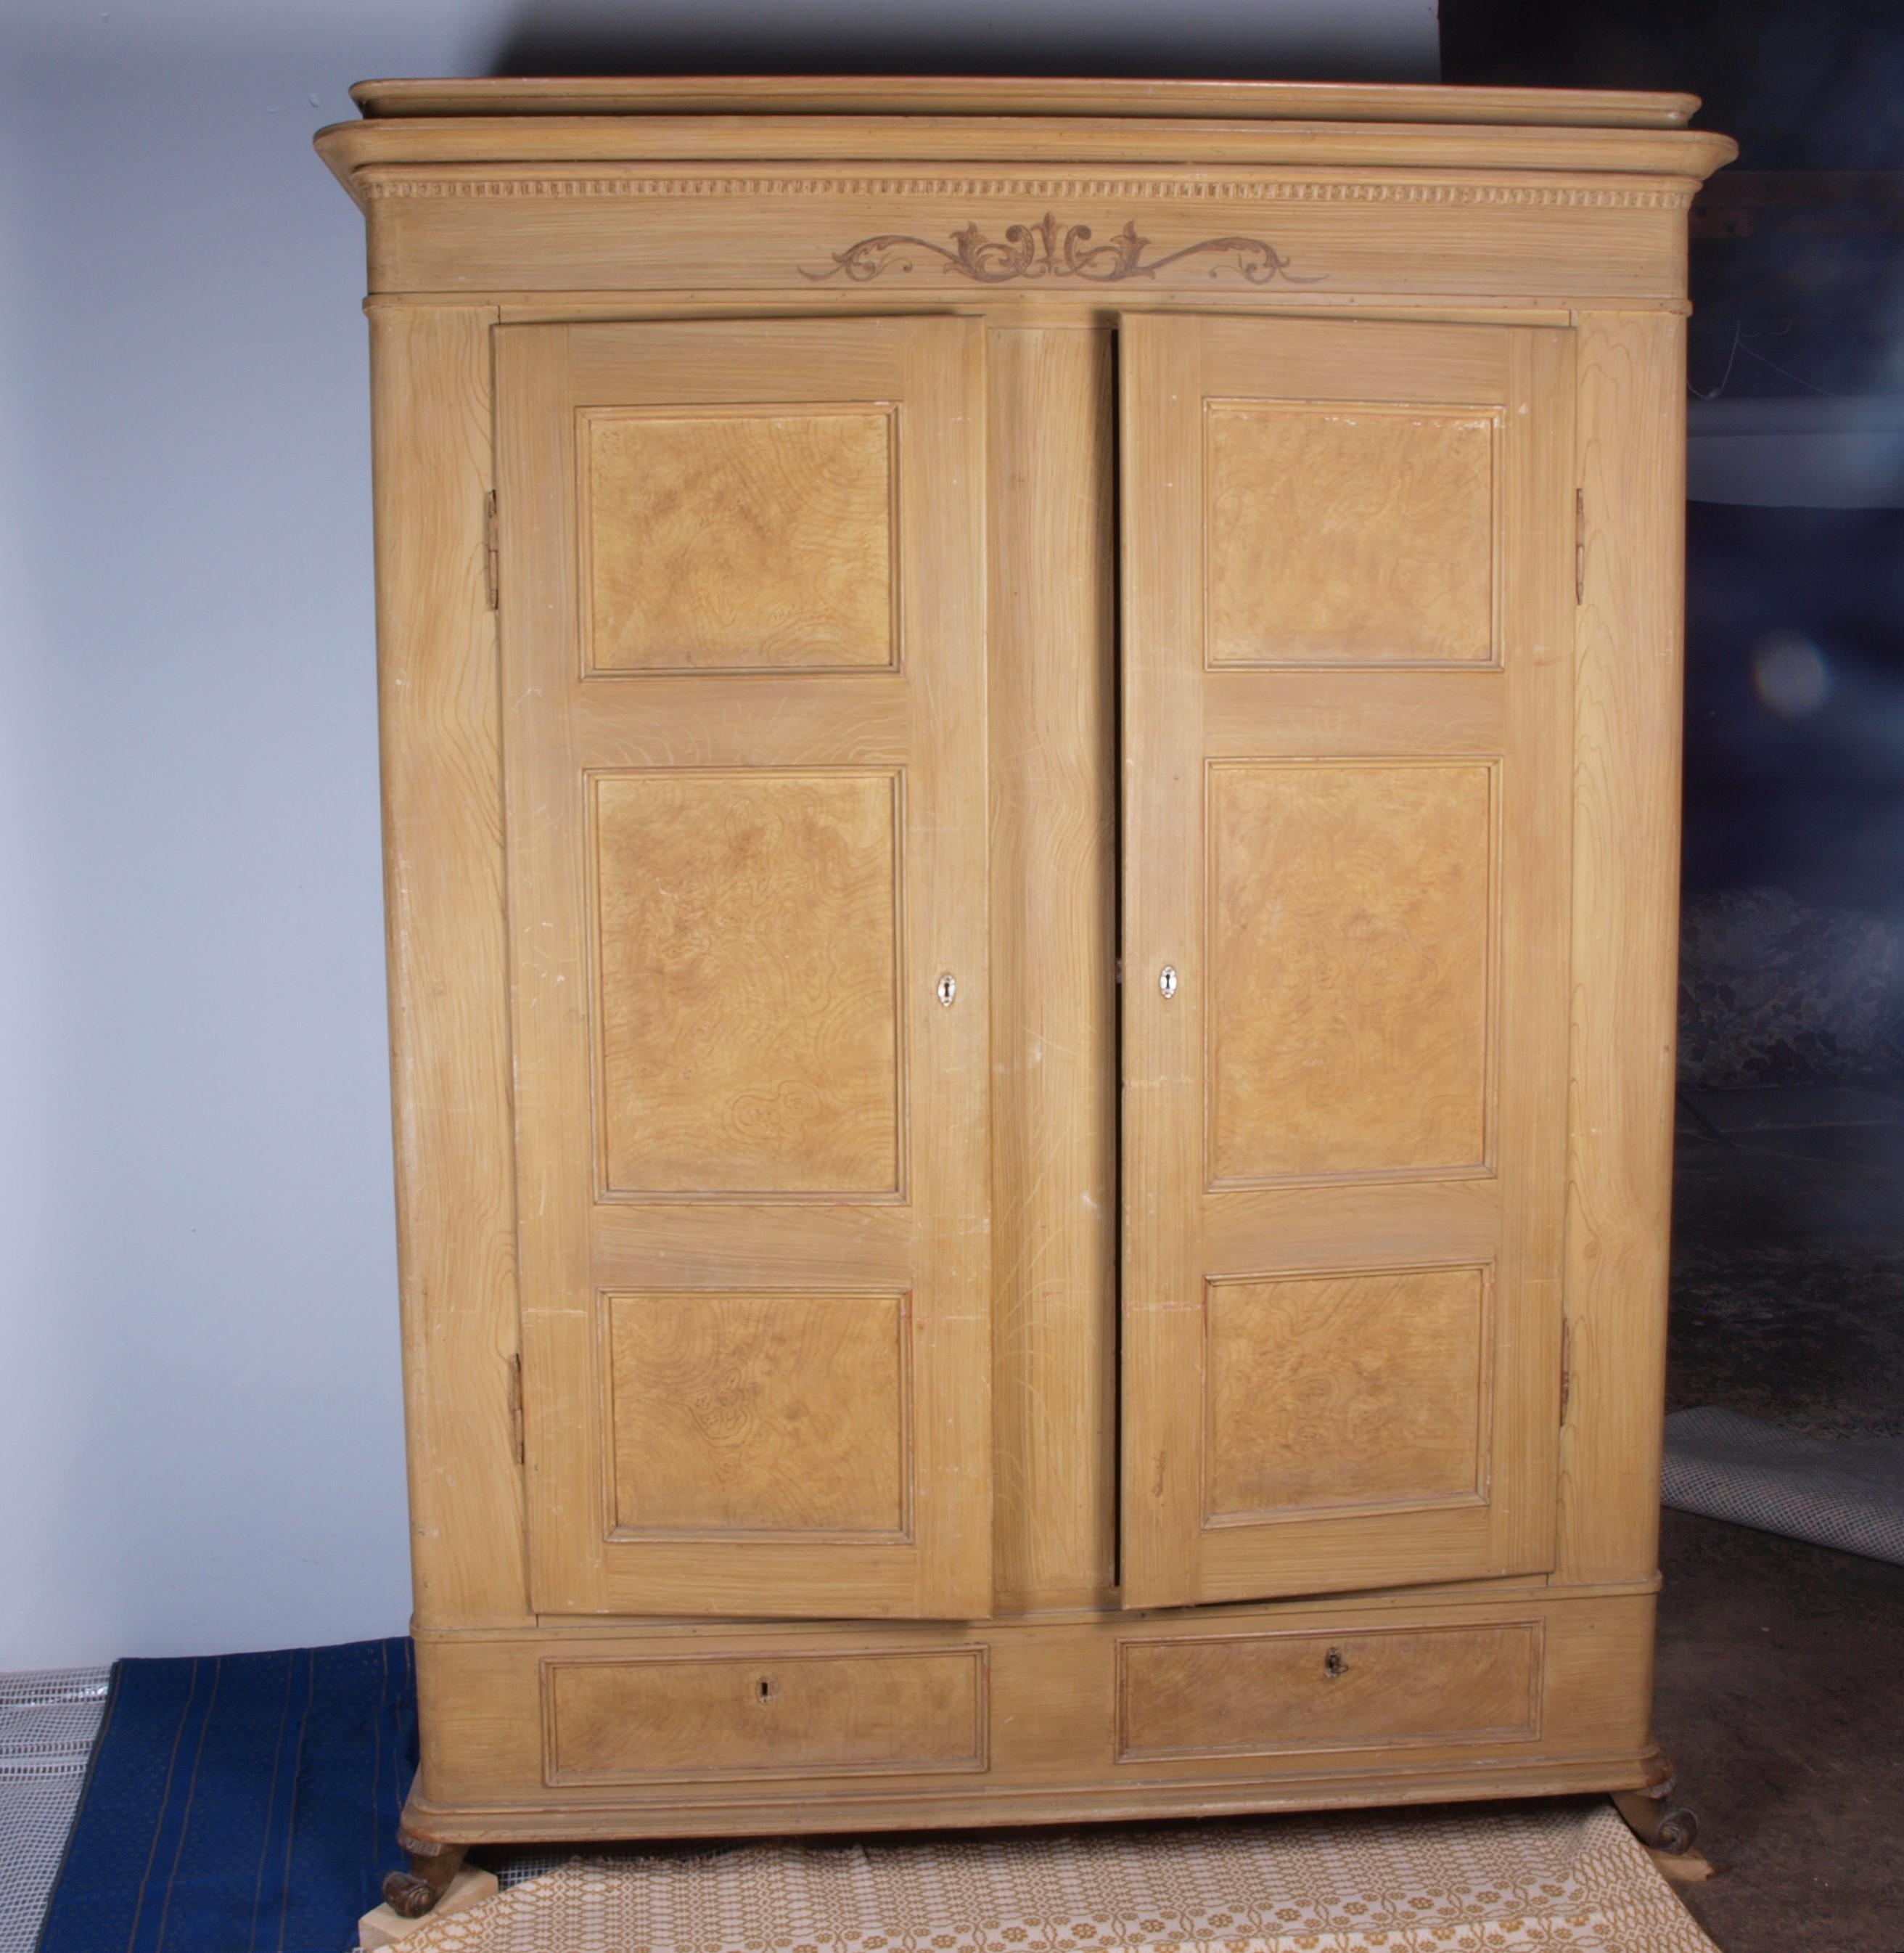 An antique Danish cabinet crafted from beautifully painted pine wood, it boasts an excellent, well-patinated condition that exudes charm. Its extraordinary size makes it a truly unique piece of furniture, ideal for the entrance room or hall,